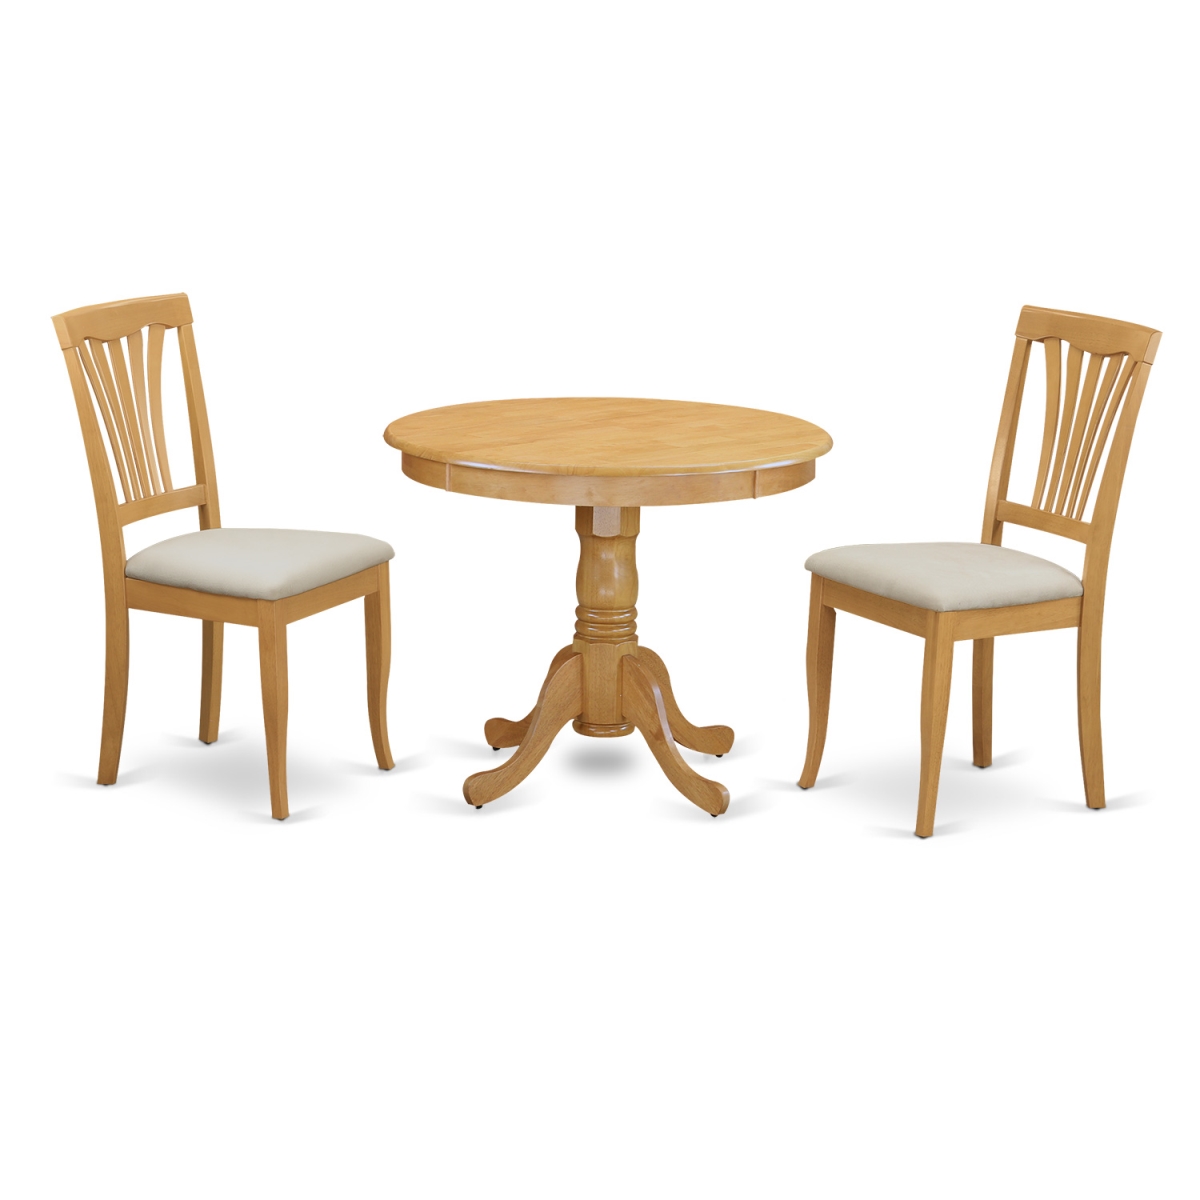 Picture of East West Furniture ANAV3-OAK-C Antique Dining Room Kitchen Dinette Table & 2 Chairs, Oak